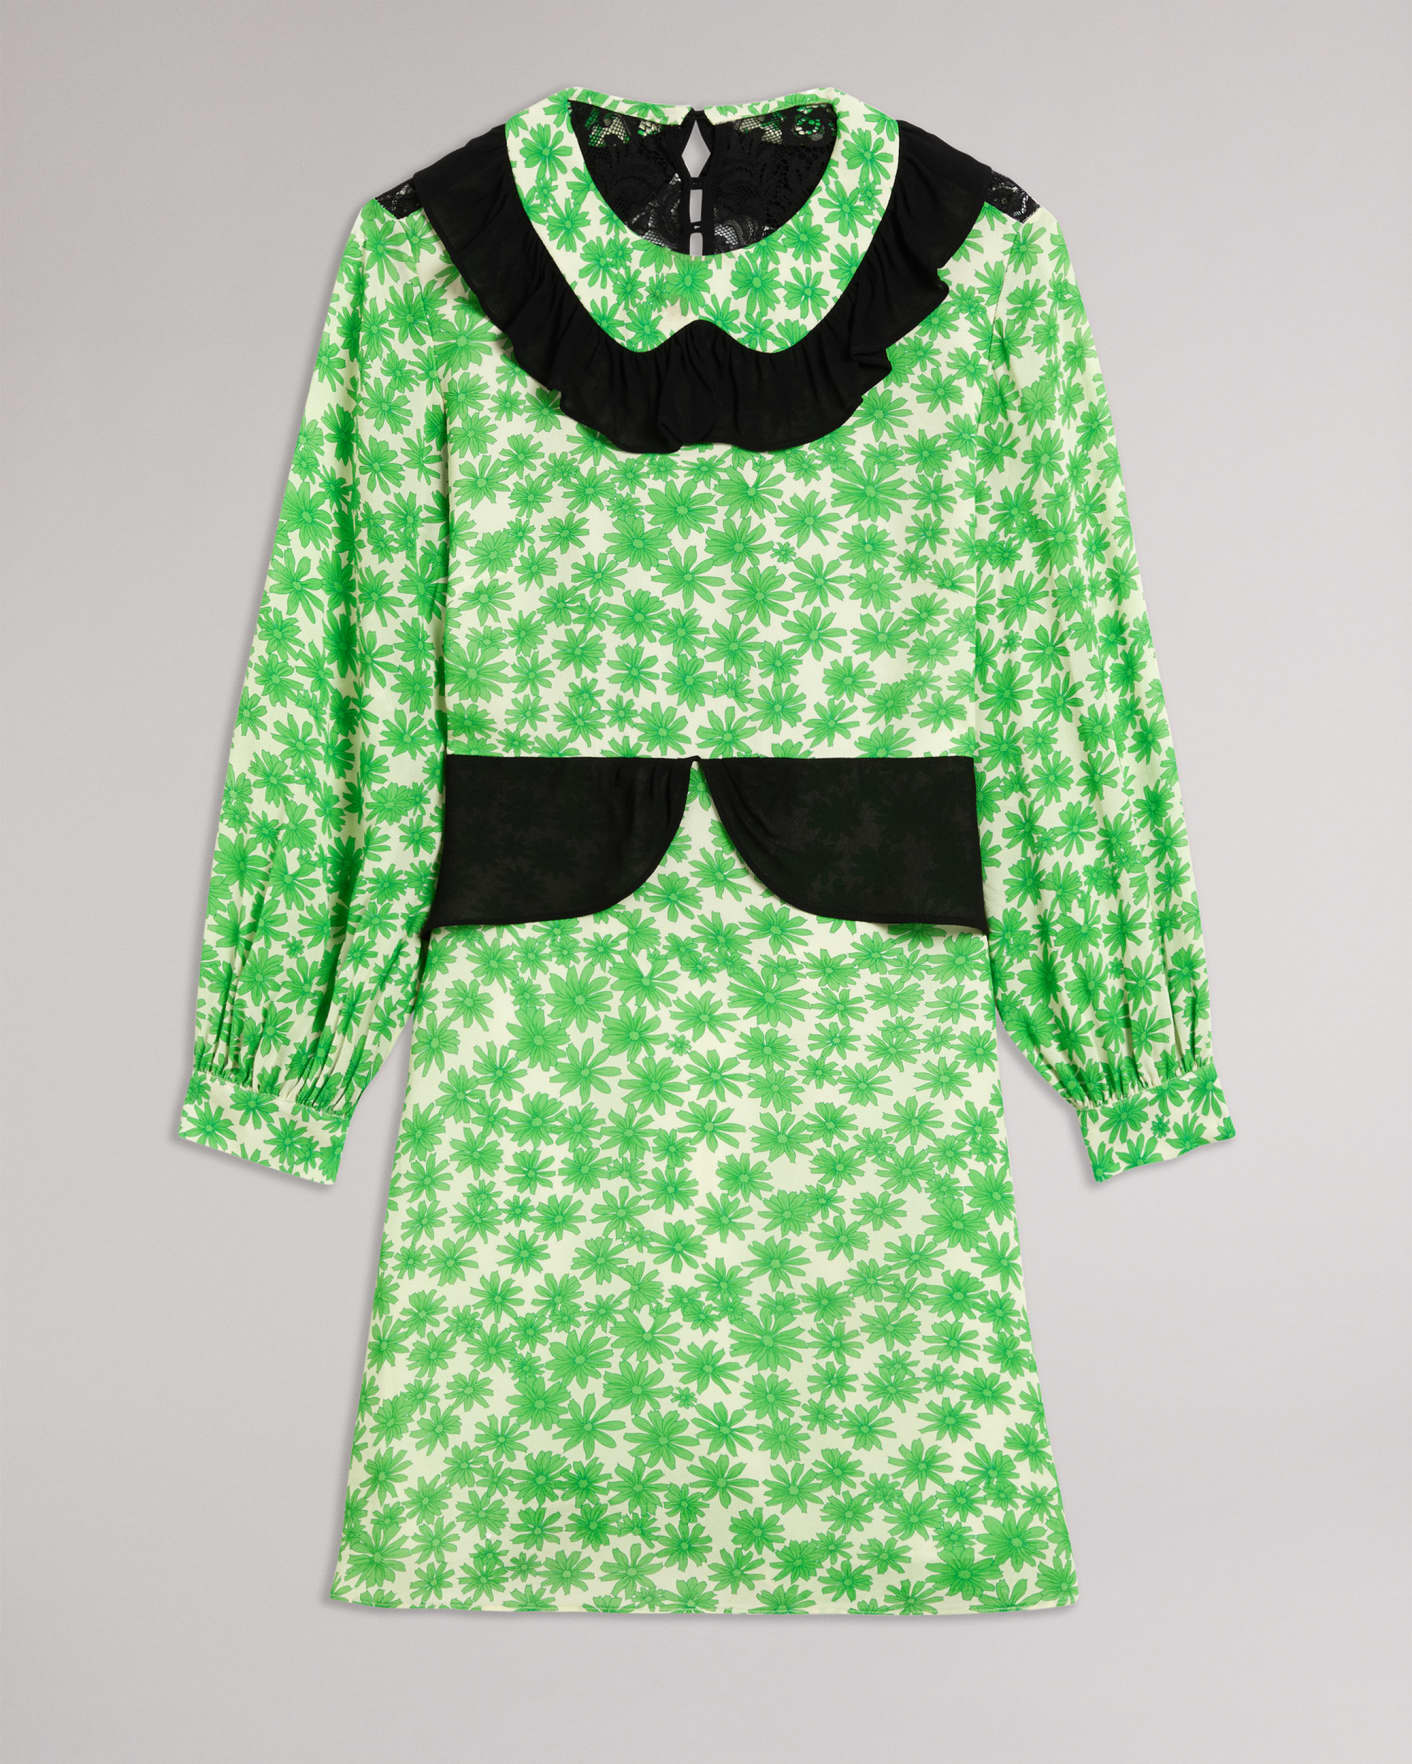 Green MIB Floral Printed Dress Ted Baker